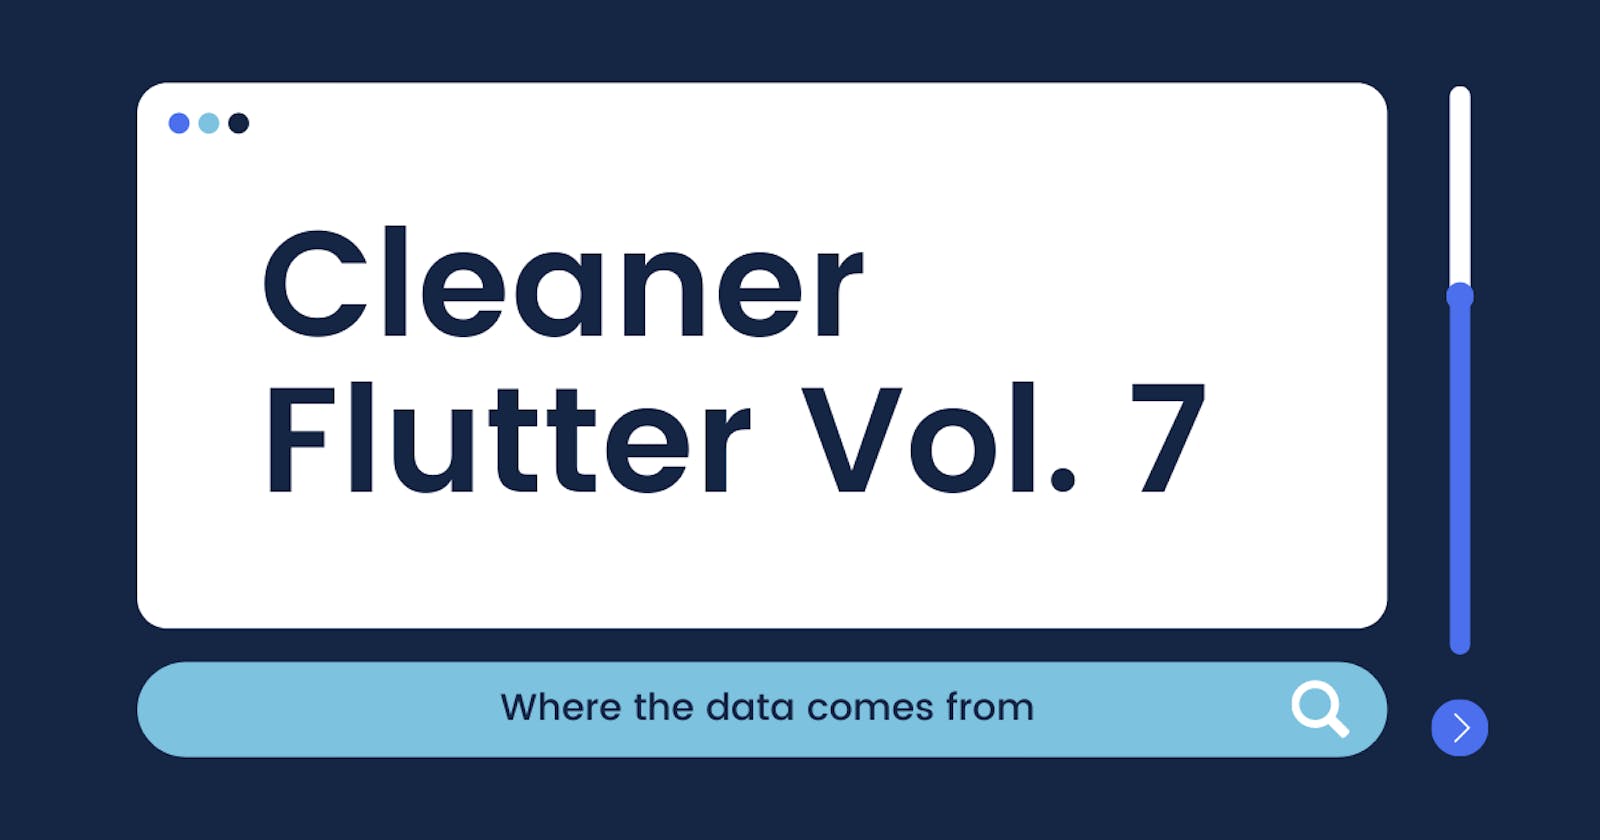 Cleaner Flutter Vol. 7: Where the data comes from